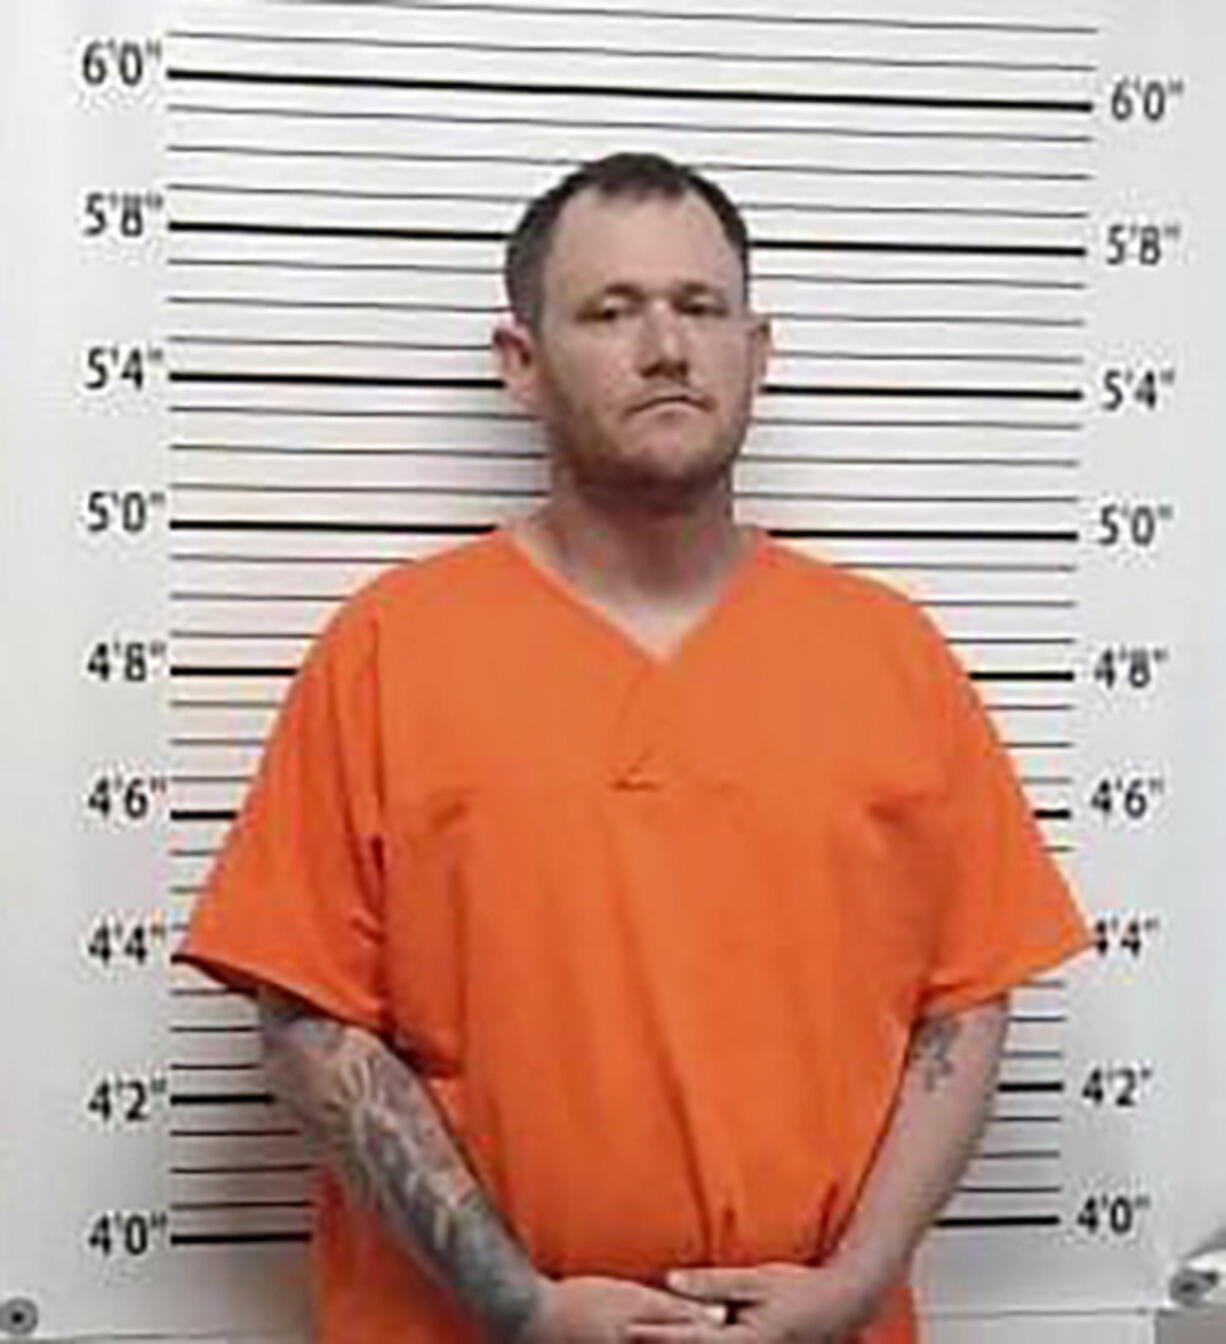 FILE -This photo provided by Caddo County, Oklahoma, Sheriff's Office on Thursday, Jan. 19, 2023 shows Ivon Adams. Ivon Adams, 36, was arrested in Arizona on murder and child neglect charges and returned to Oklahoma. An affidavit for Ivon Adams' arrest alleges he beat 4-year-old Athena Brownfield to death the night of Dec. 25 and later buried her on property he and his wife once owned near the nearby town of Rush Springs, where authorities found the child's body.